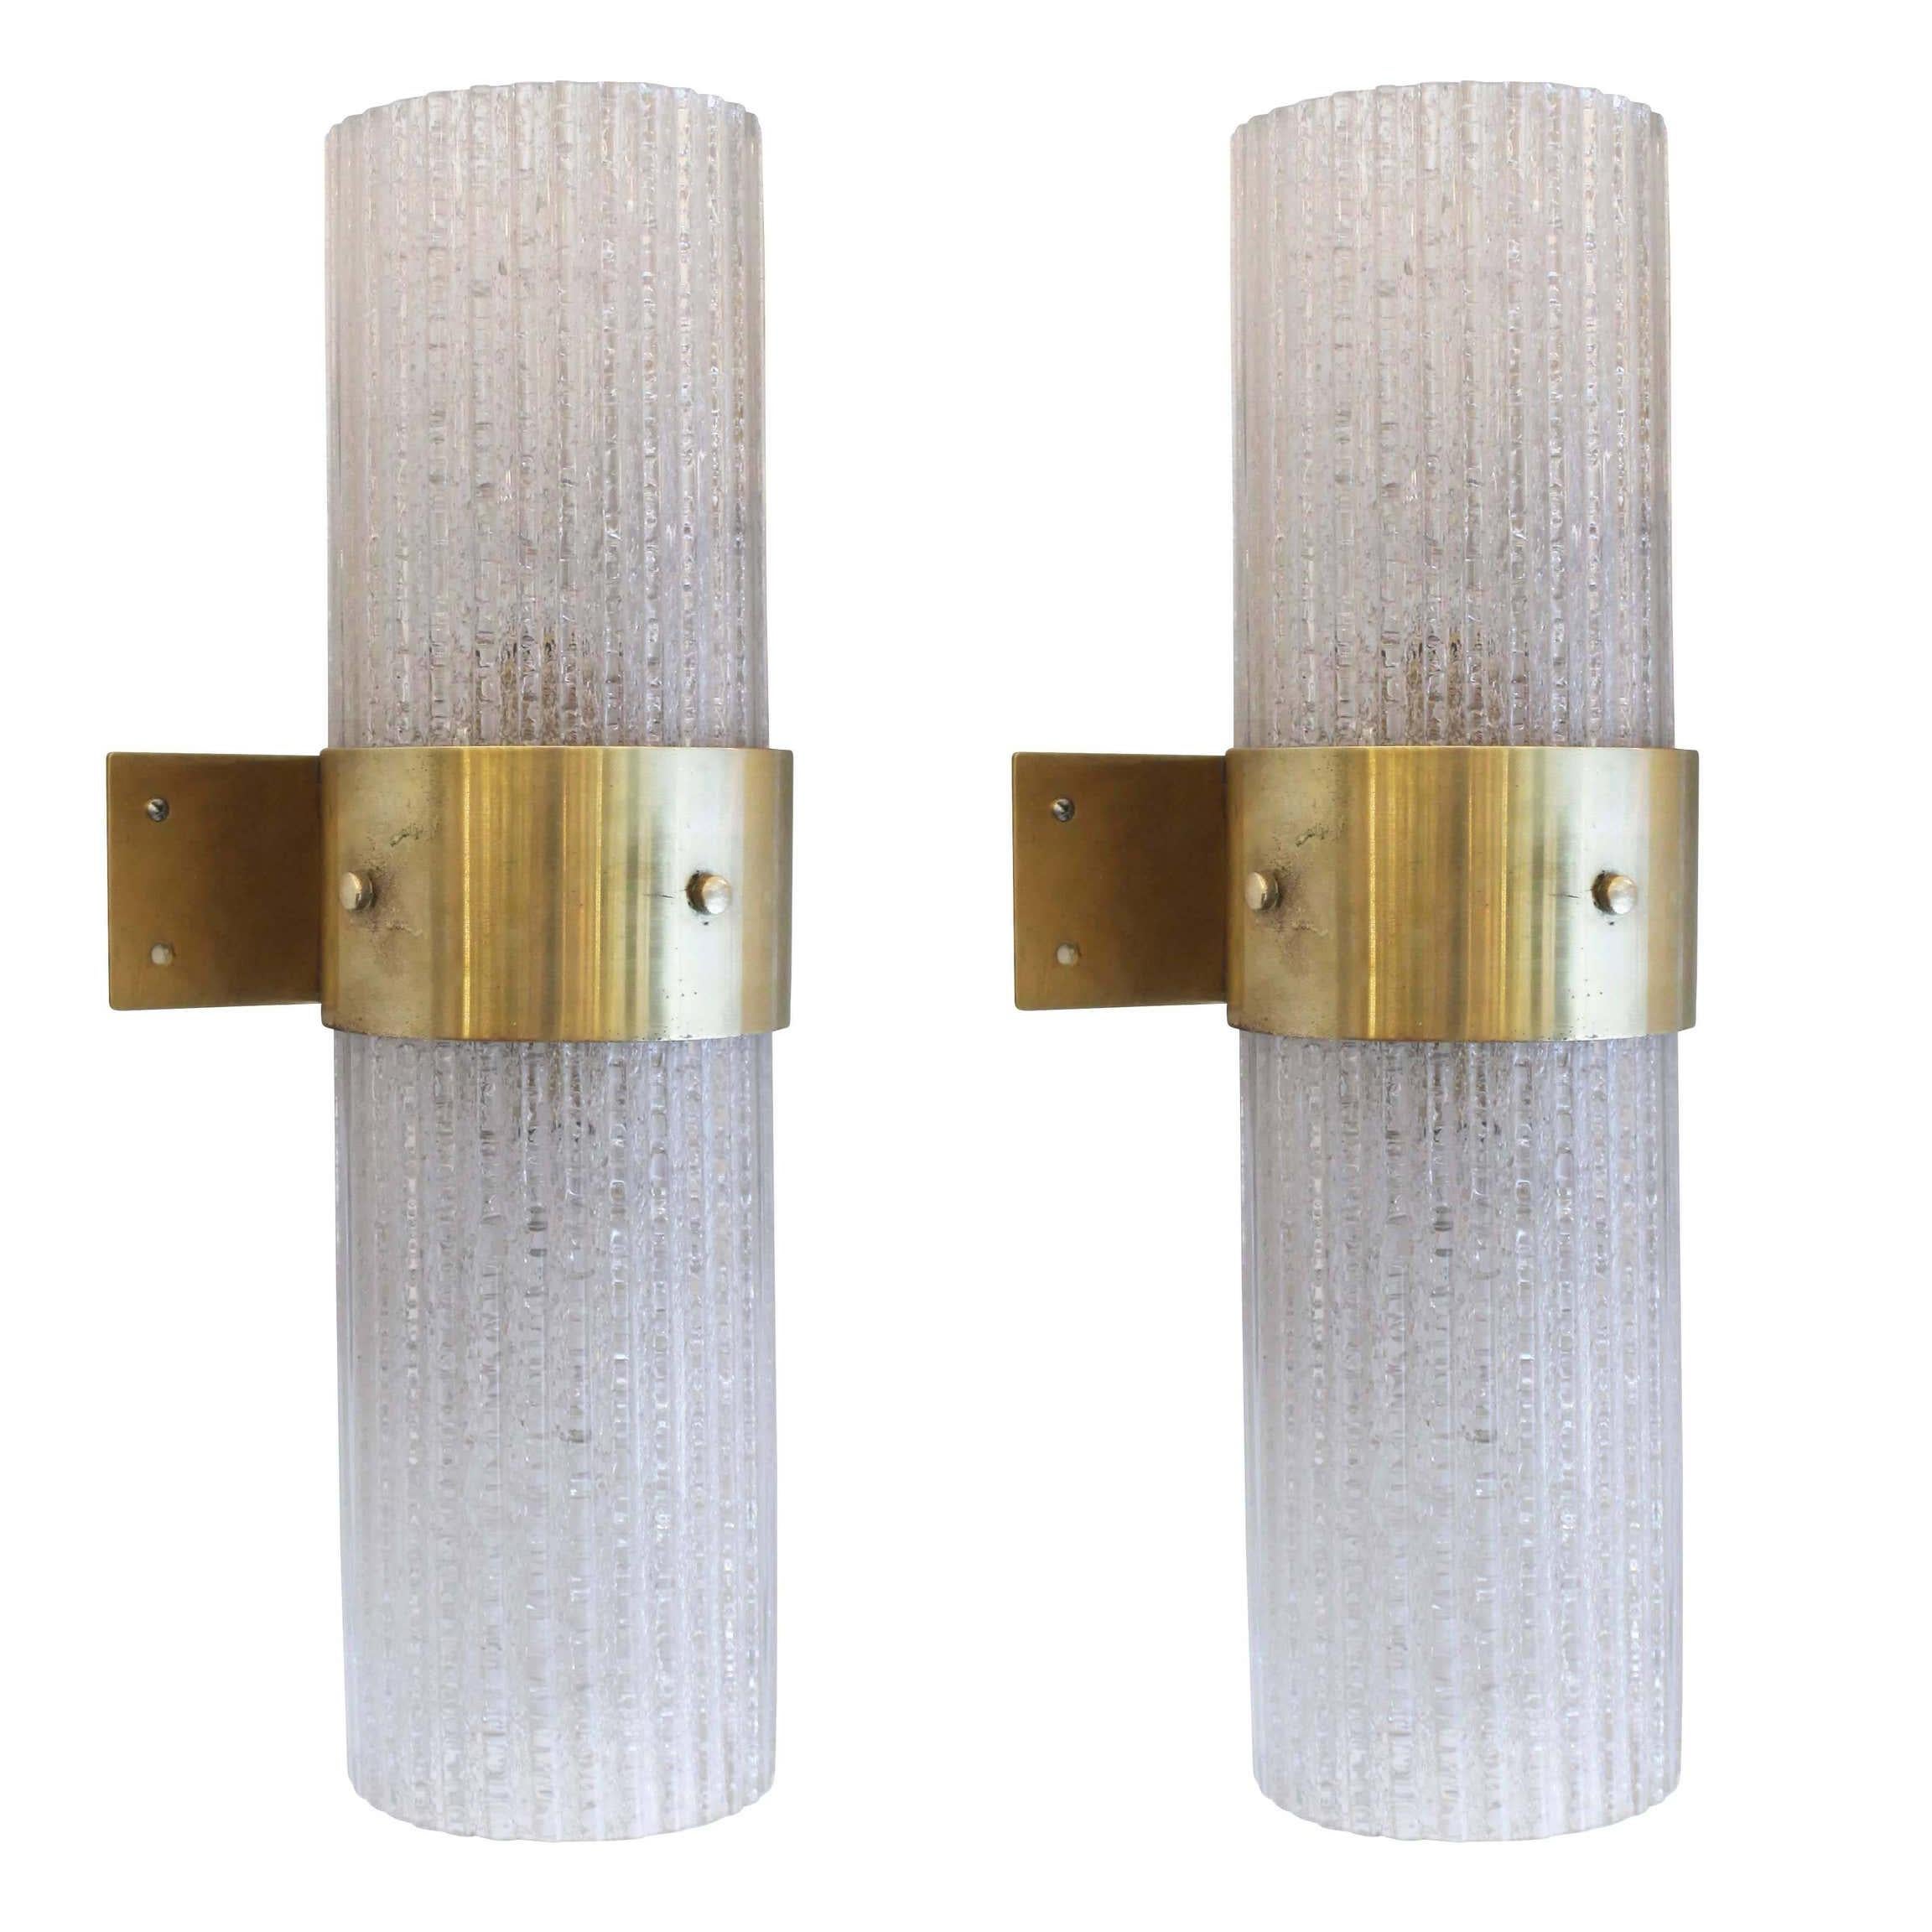 Pair of large glass sconces with brass brackets from a palace in, Florence. The glass is ribbed and textured so that the light bulbs are not visible. Each holds two regular sockets in order to light up any large space.